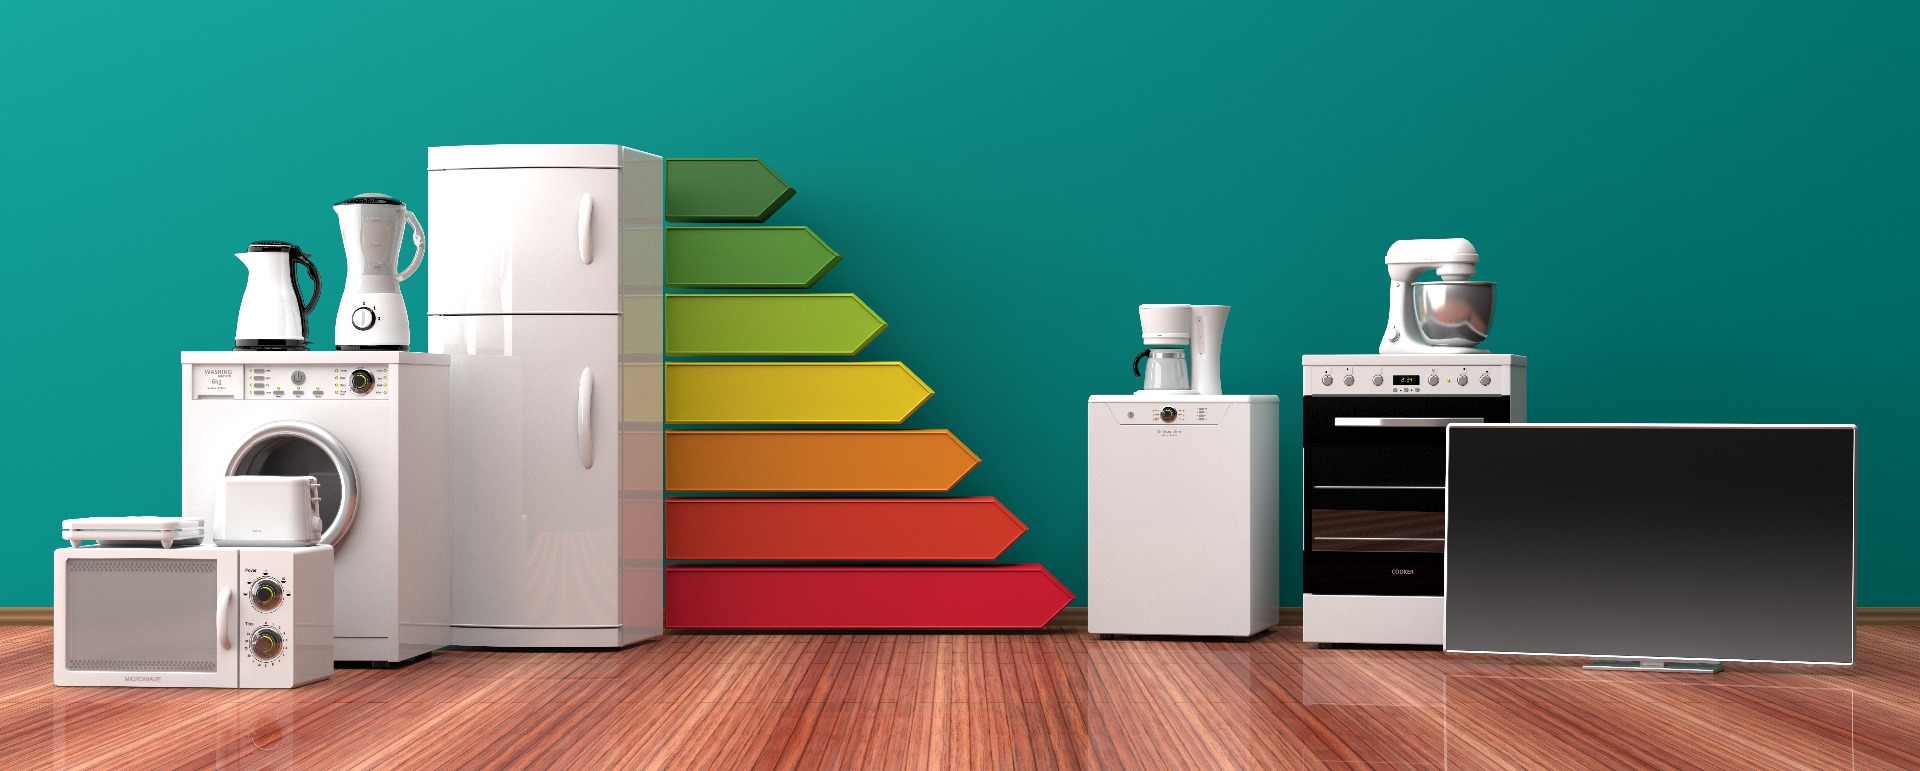 A range of appliances, including a fridge-freezer, microwave, toaster, kettle, over and TV, with an EPC rating, linking to our Conveyancing Solicitors' blog on Energy Performance Certificates.